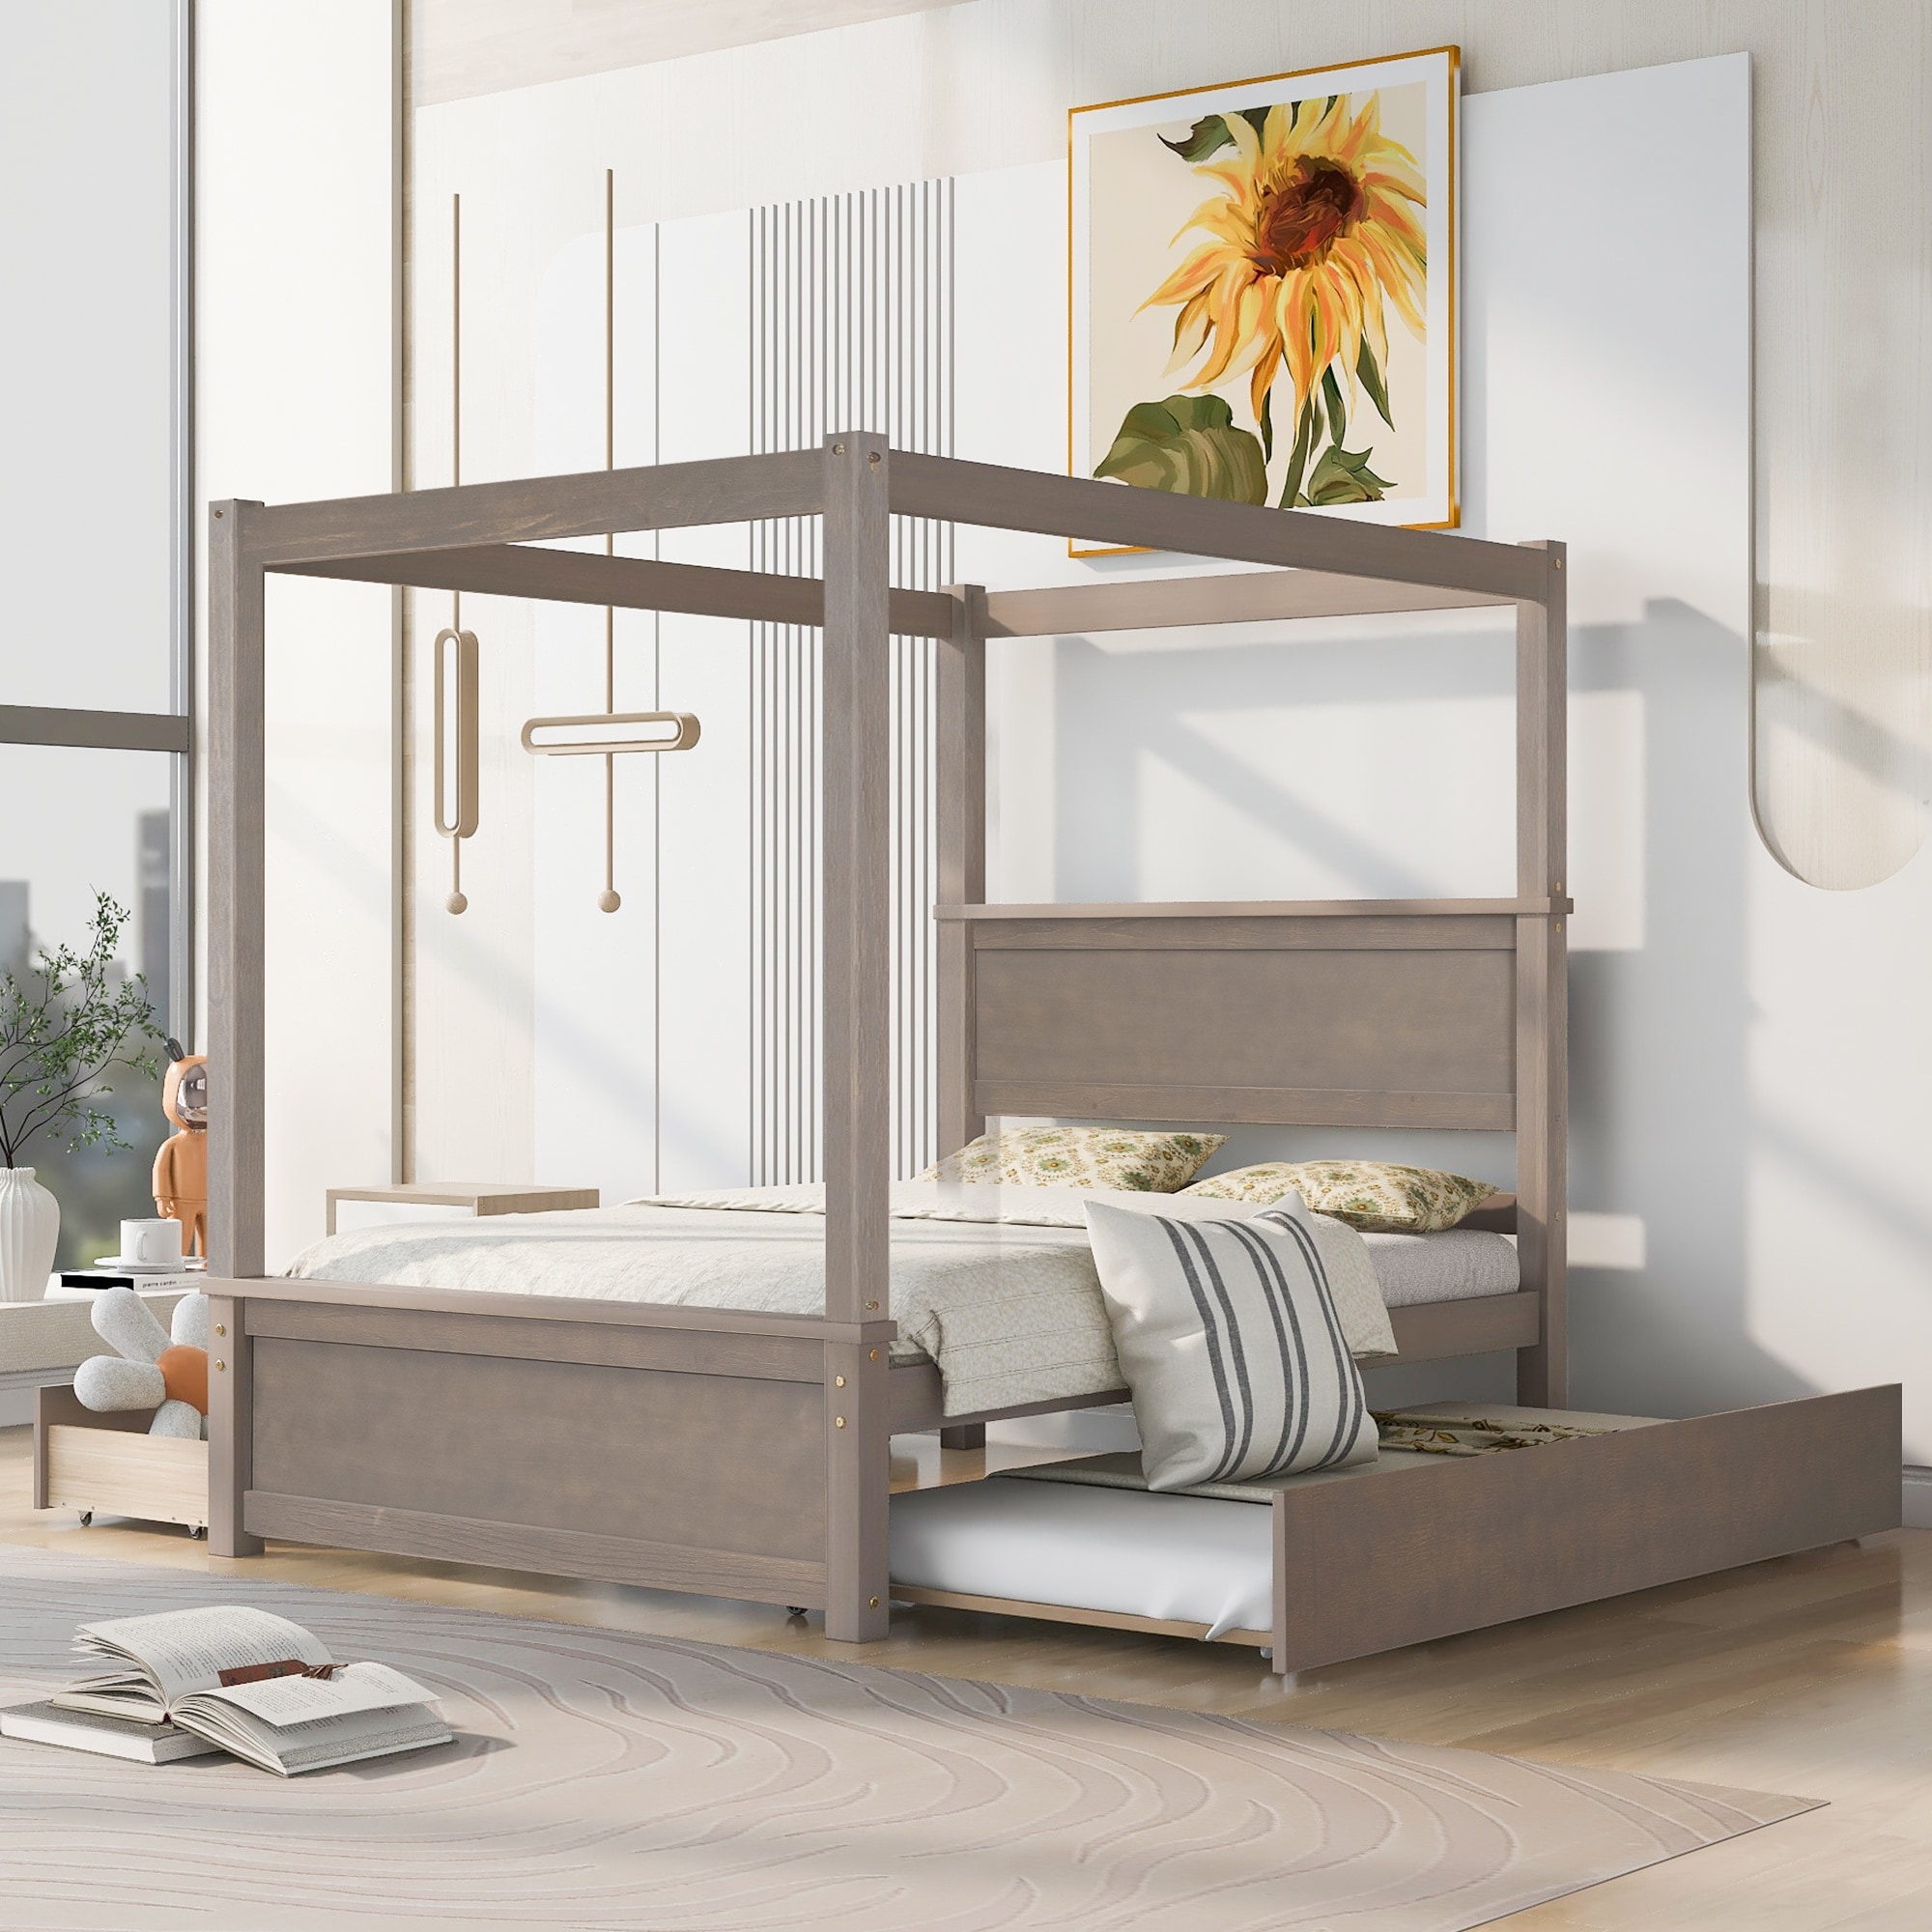 Wood Canopy Platform Bed With Trundle Bed And Two Drawers